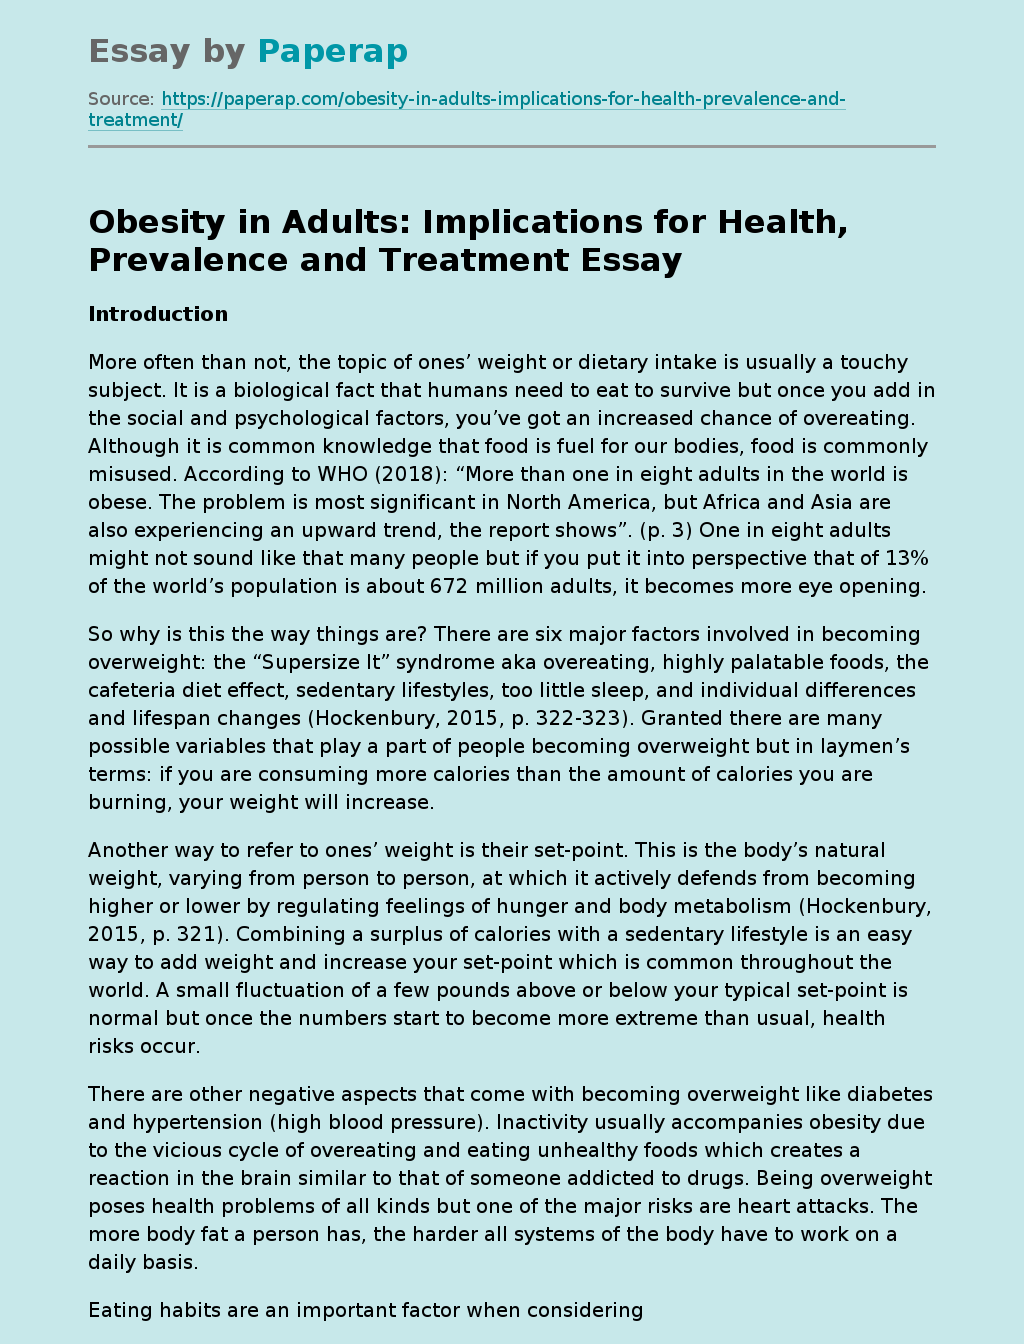 Obesity in Adults: Implications for Health, Prevalence and Treatment